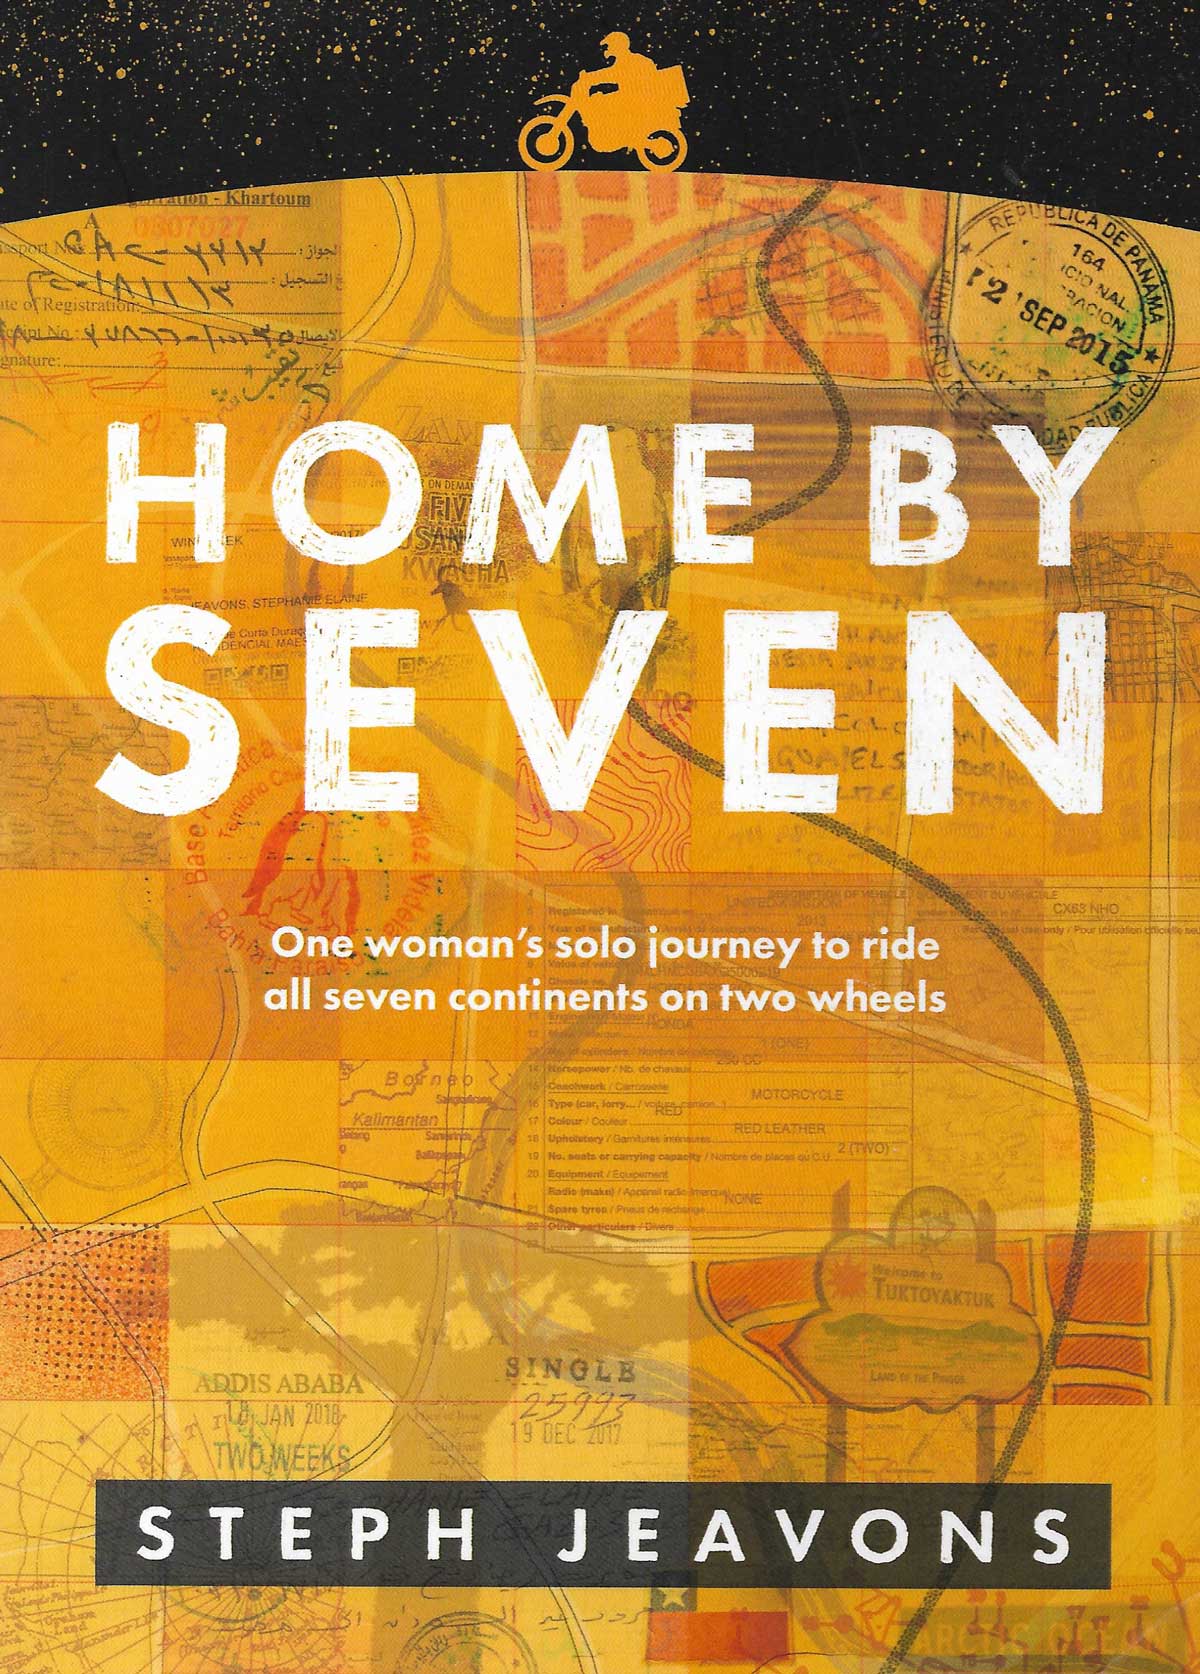 Home by Seven